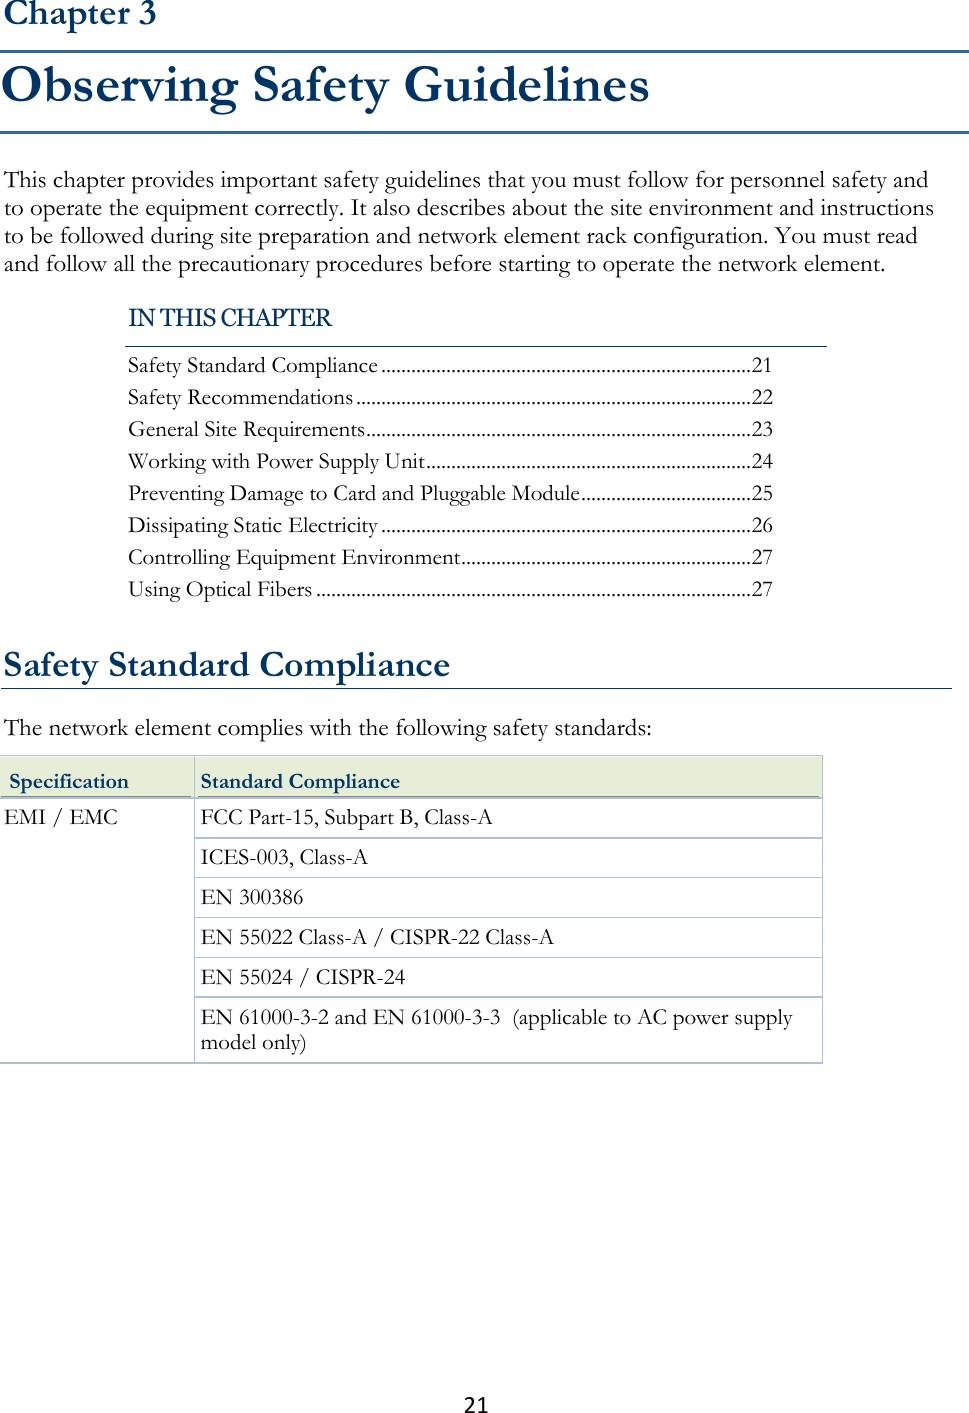 21  This chapter provides important safety guidelines that you must follow for personnel safety and to operate the equipment correctly. It also describes about the site environment and instructions to be followed during site preparation and network element rack configuration. You must read and follow all the precautionary procedures before starting to operate the network element.   Safety Standard Compliance The network element complies with the following safety standards:  Specification Standard Compliance EMI / EMC  FCC Part-15, Subpart B, Class-A ICES-003, Class-A EN 300386 EN 55022 Class-A / CISPR-22 Class-A EN 55024 / CISPR-24 EN 61000-3-2 and EN 61000-3-3  (applicable to AC power supply model only) Chapter 3 Observing Safety Guidelines IN THIS CHAPTER Safety Standard Compliance .......................................................................... 21 Safety Recommendations ............................................................................... 22 General Site Requirements ............................................................................. 23 Working with Power Supply Unit ................................................................. 24 Preventing Damage to Card and Pluggable Module .................................. 25 Dissipating Static Electricity .......................................................................... 26 Controlling Equipment Environment .......................................................... 27 Using Optical Fibers ....................................................................................... 27 